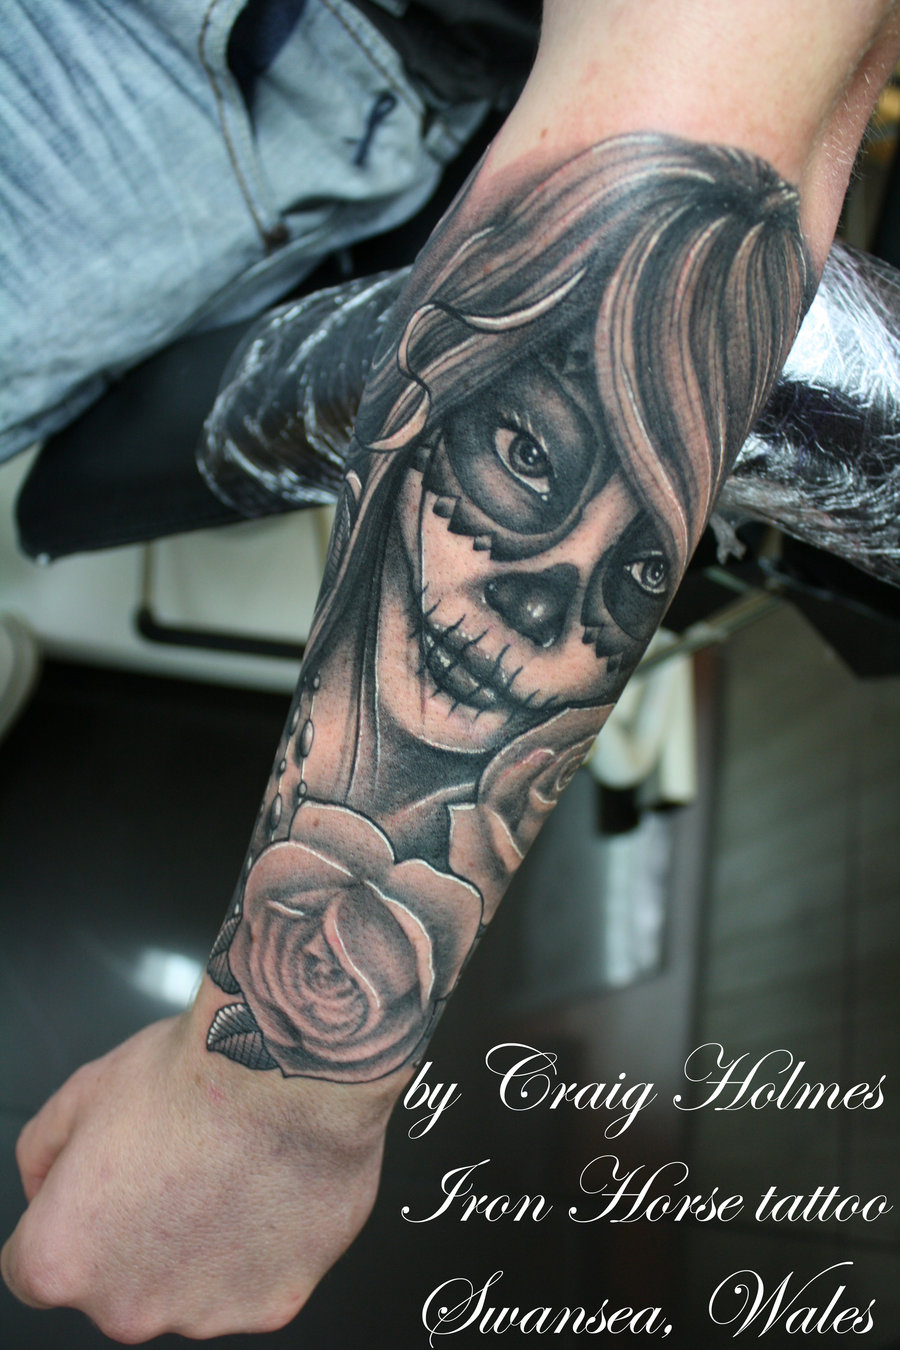 day_of_the_dead_girl_tattoo_by_craig_holmes_by_craigholmestattoo